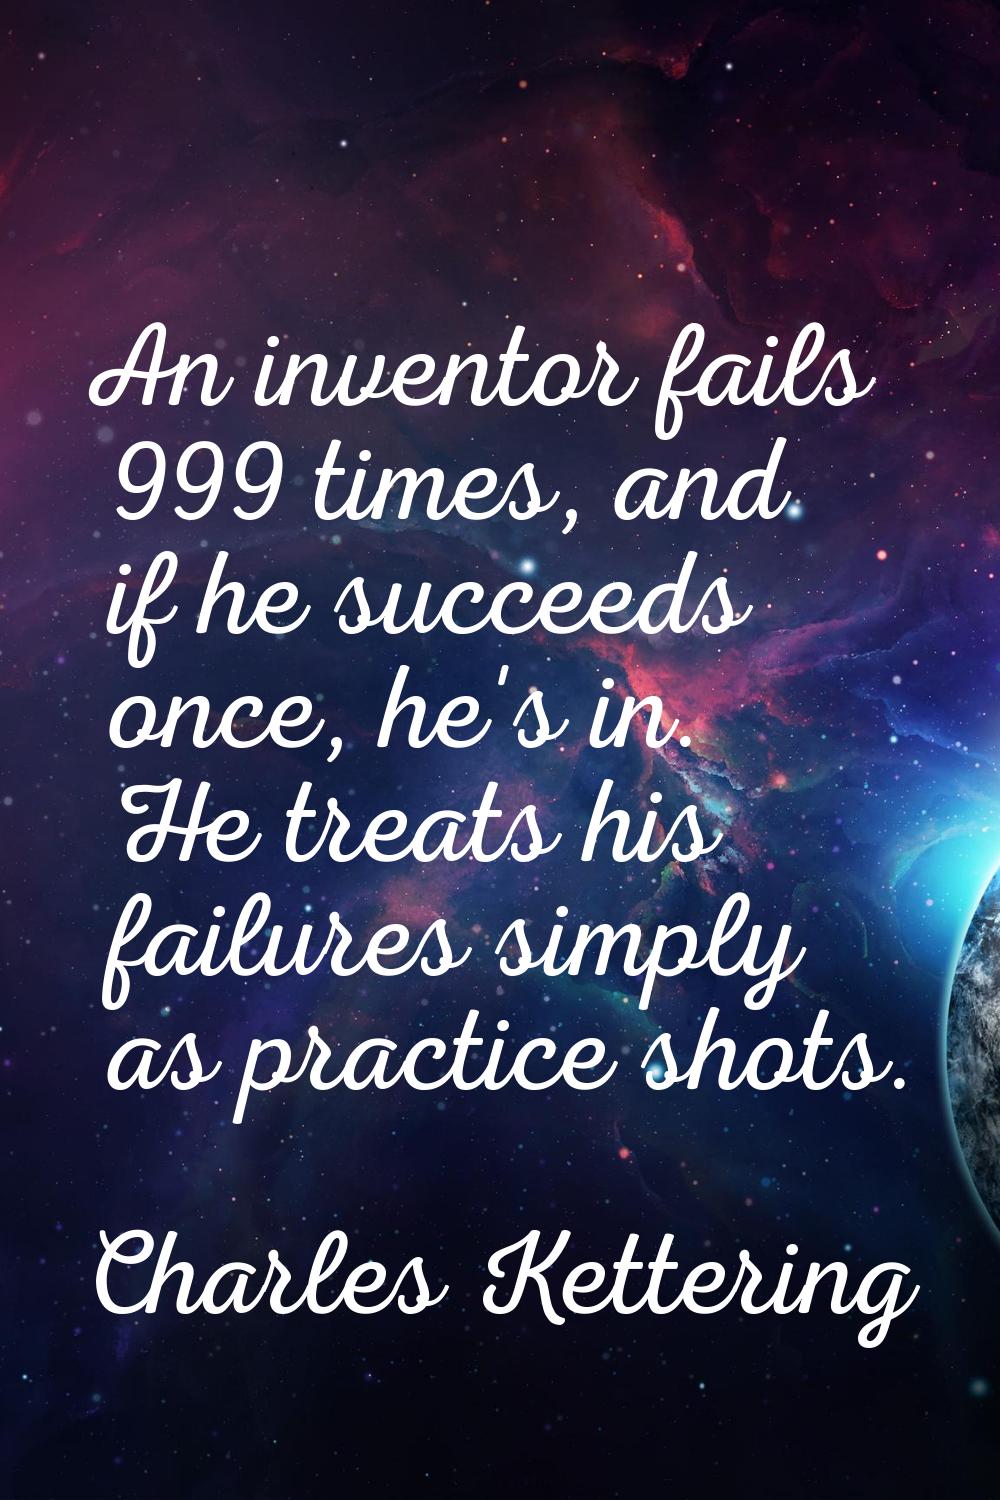 An inventor fails 999 times, and if he succeeds once, he's in. He treats his failures simply as pra